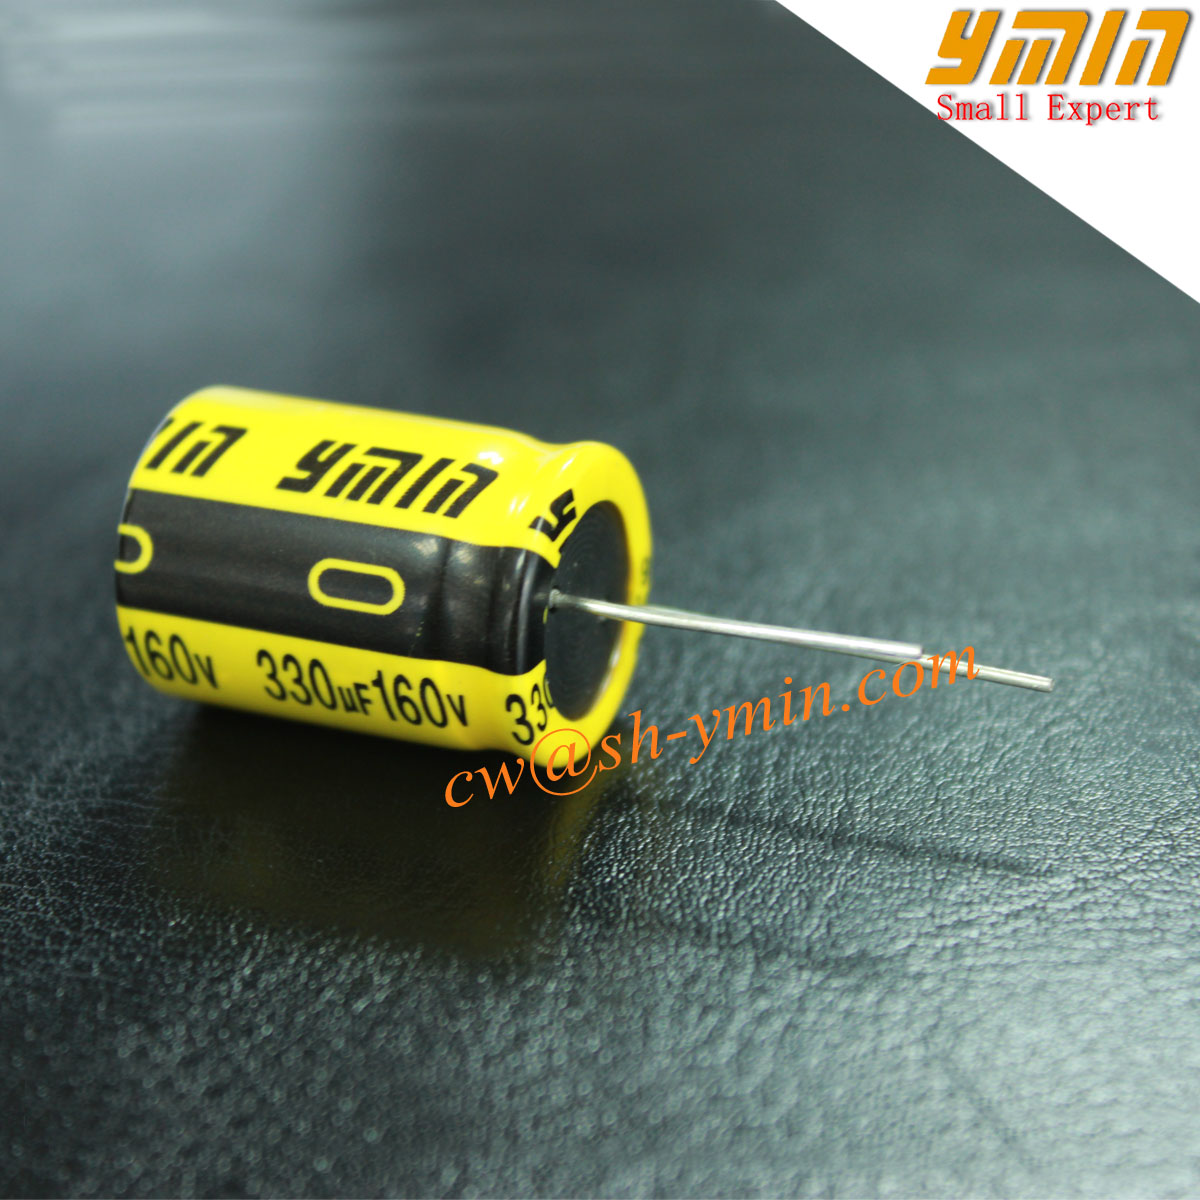 Small Size Capacitor Radial Aluminium Electrolytic Capacitor for LED Outdoor Lighting RoHS